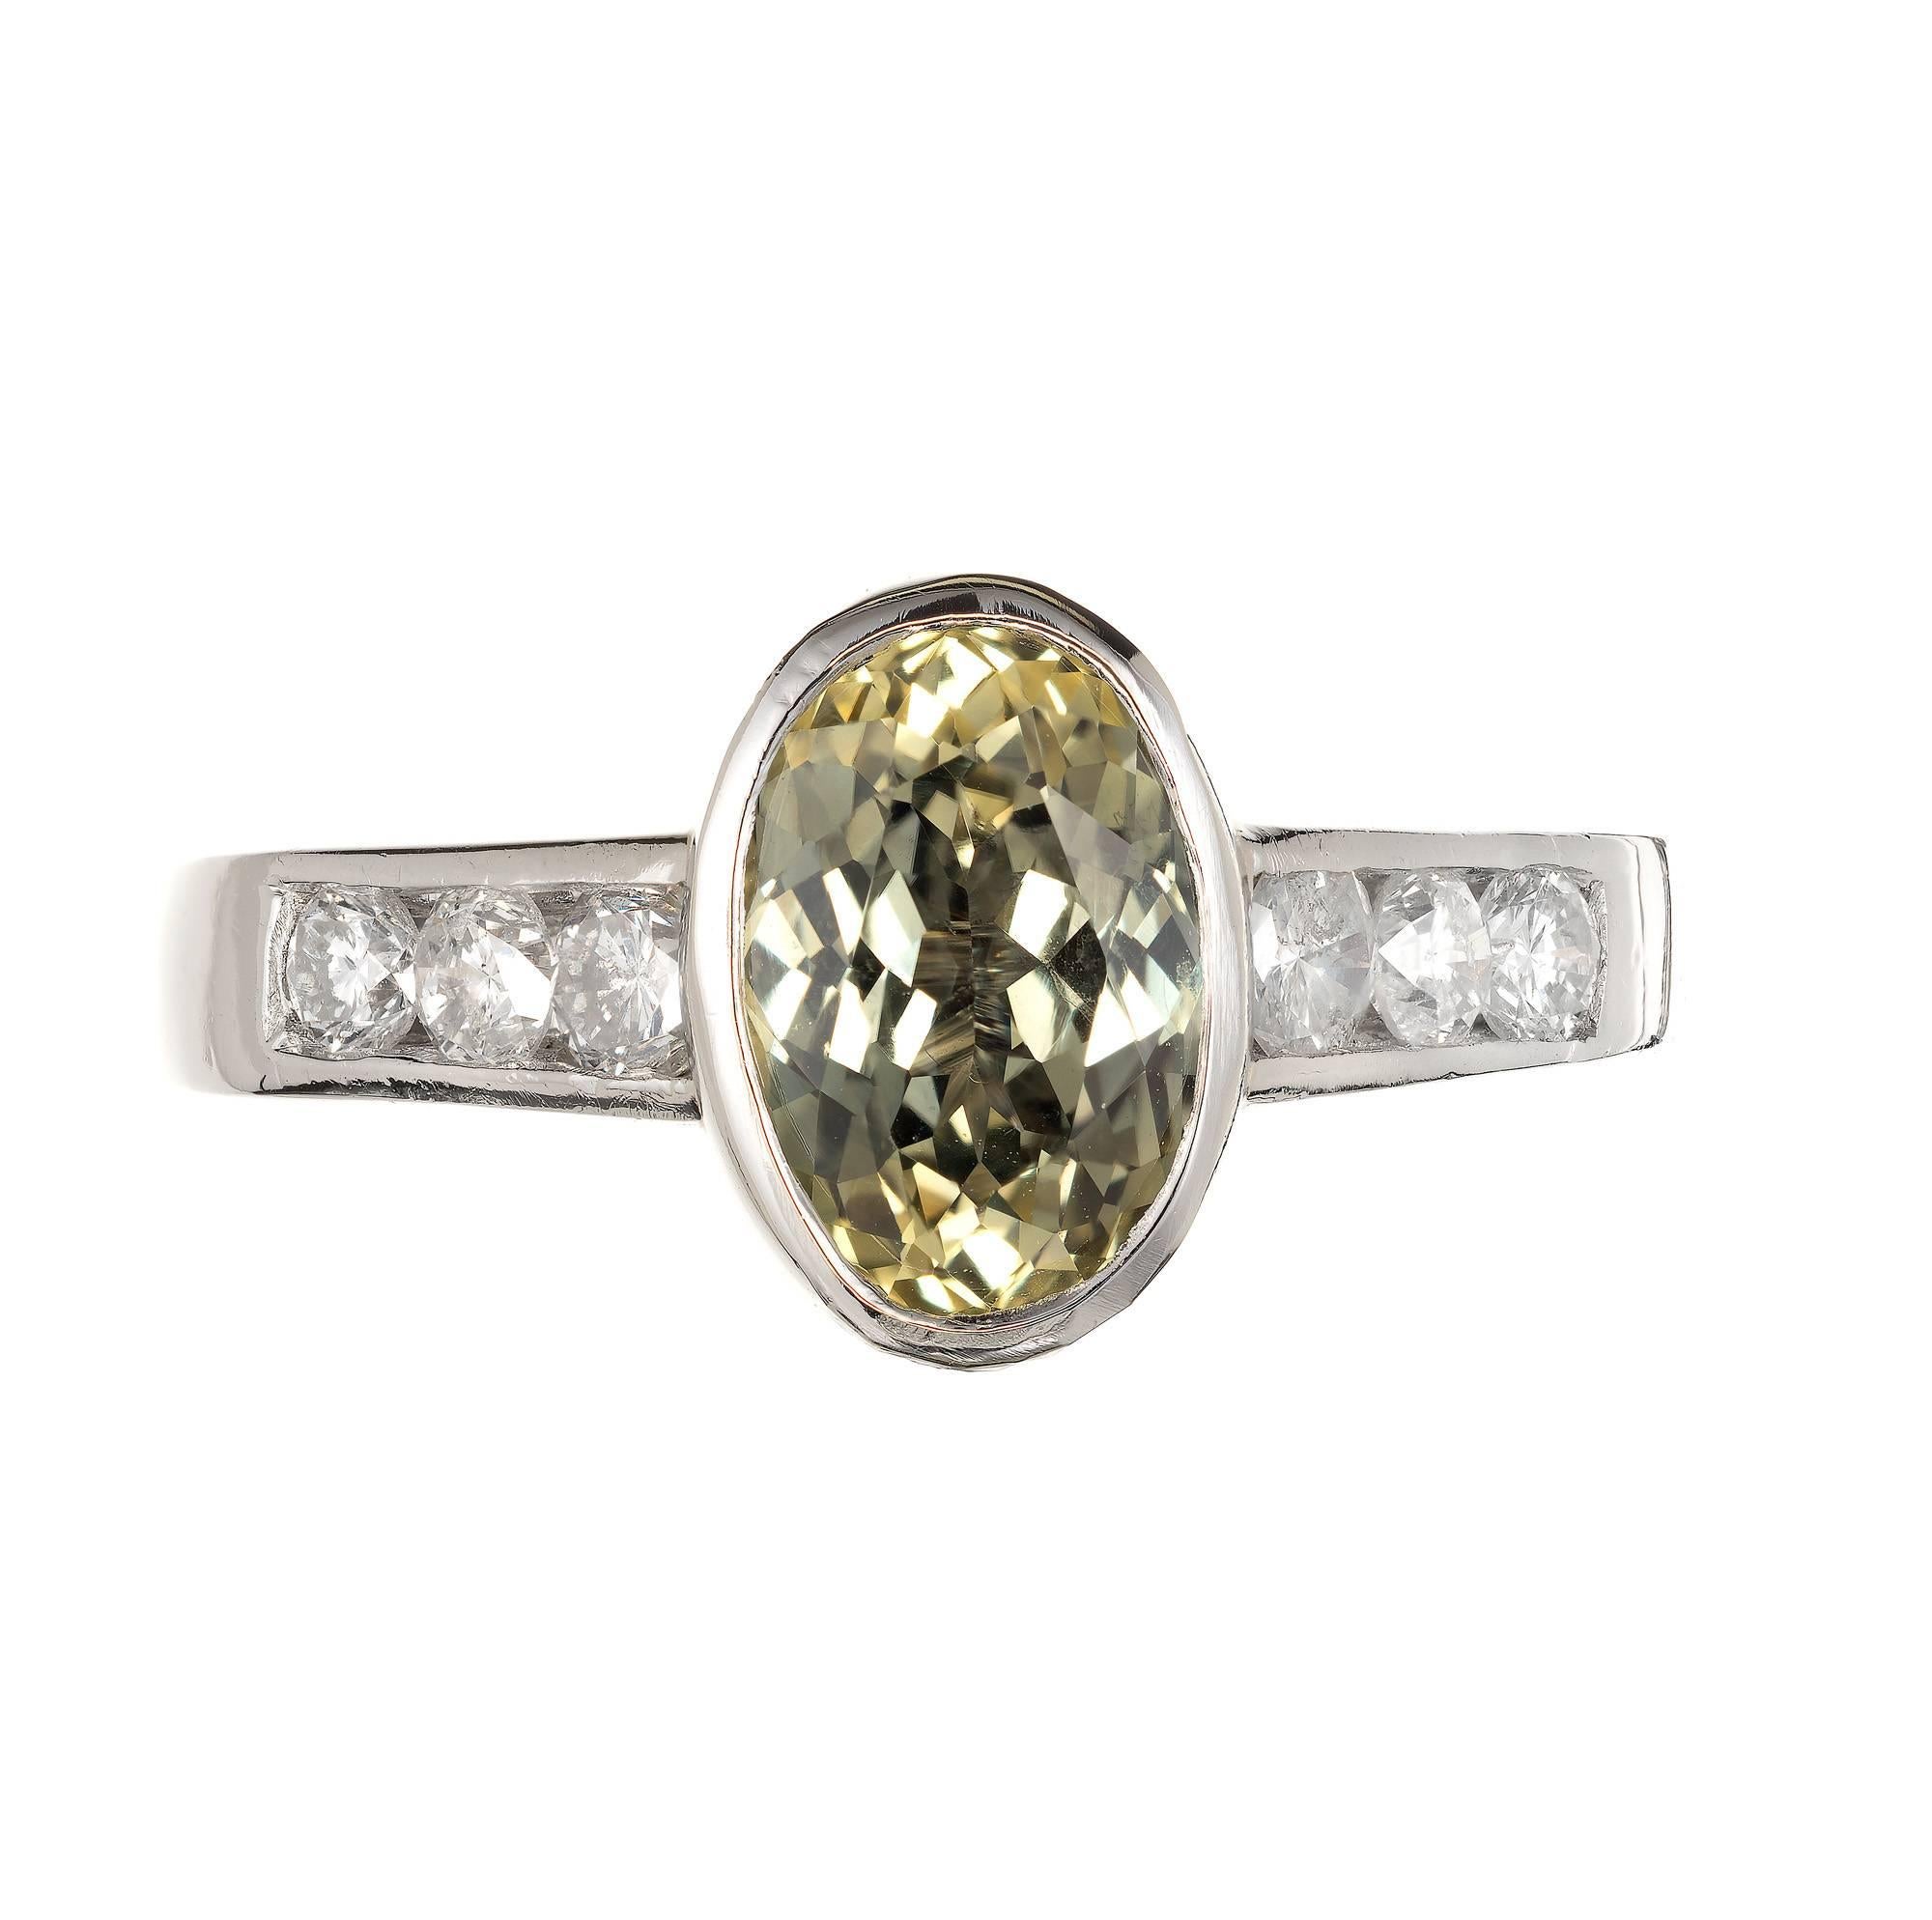 Oval 2.20 carat green yellow sapphire engagement ring. Fancy color natural no heat, no enhancement.  Handmade Platinum setting accented with round diamonds.  Color and tone change in different light. 

2.20ct natural no heat fancy greenish yellow